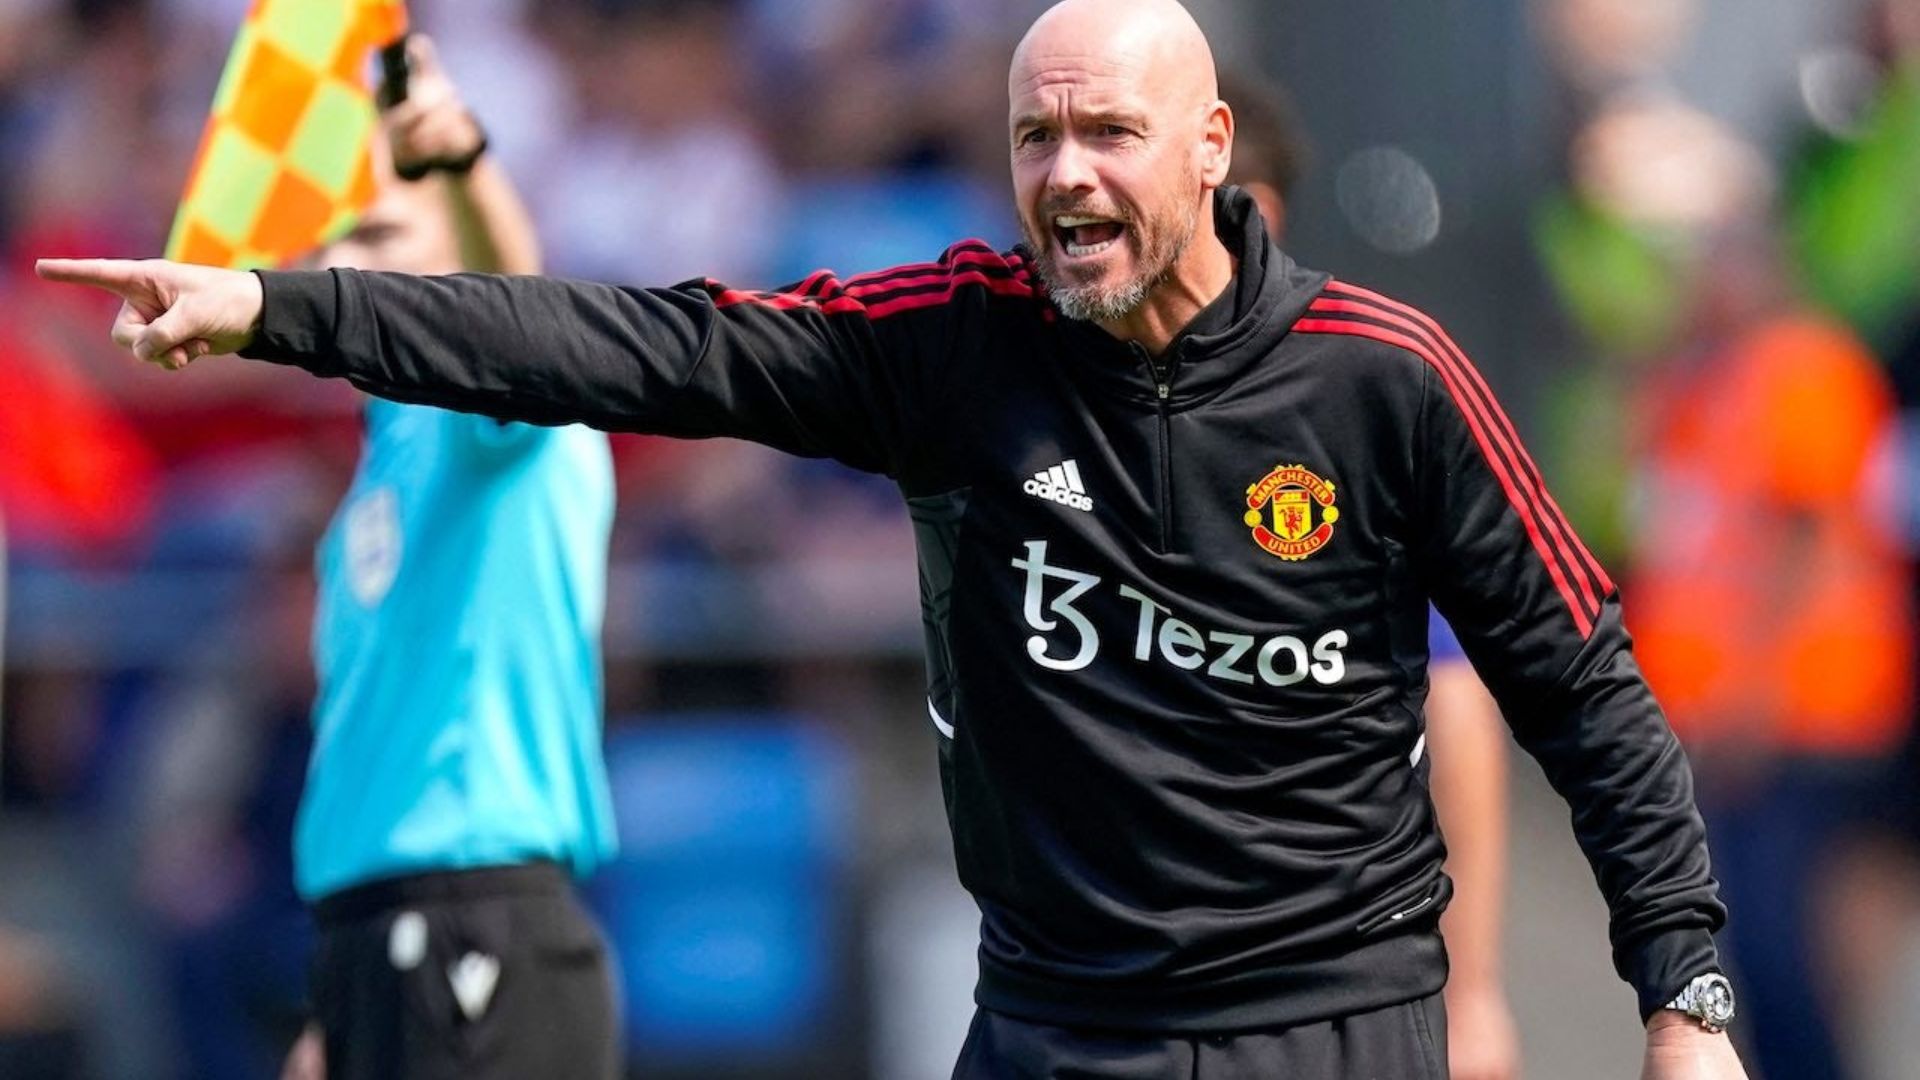 ‘He’s not good enough' – Alan Shearer tells Man Utd should let the player leave after West Ham loss